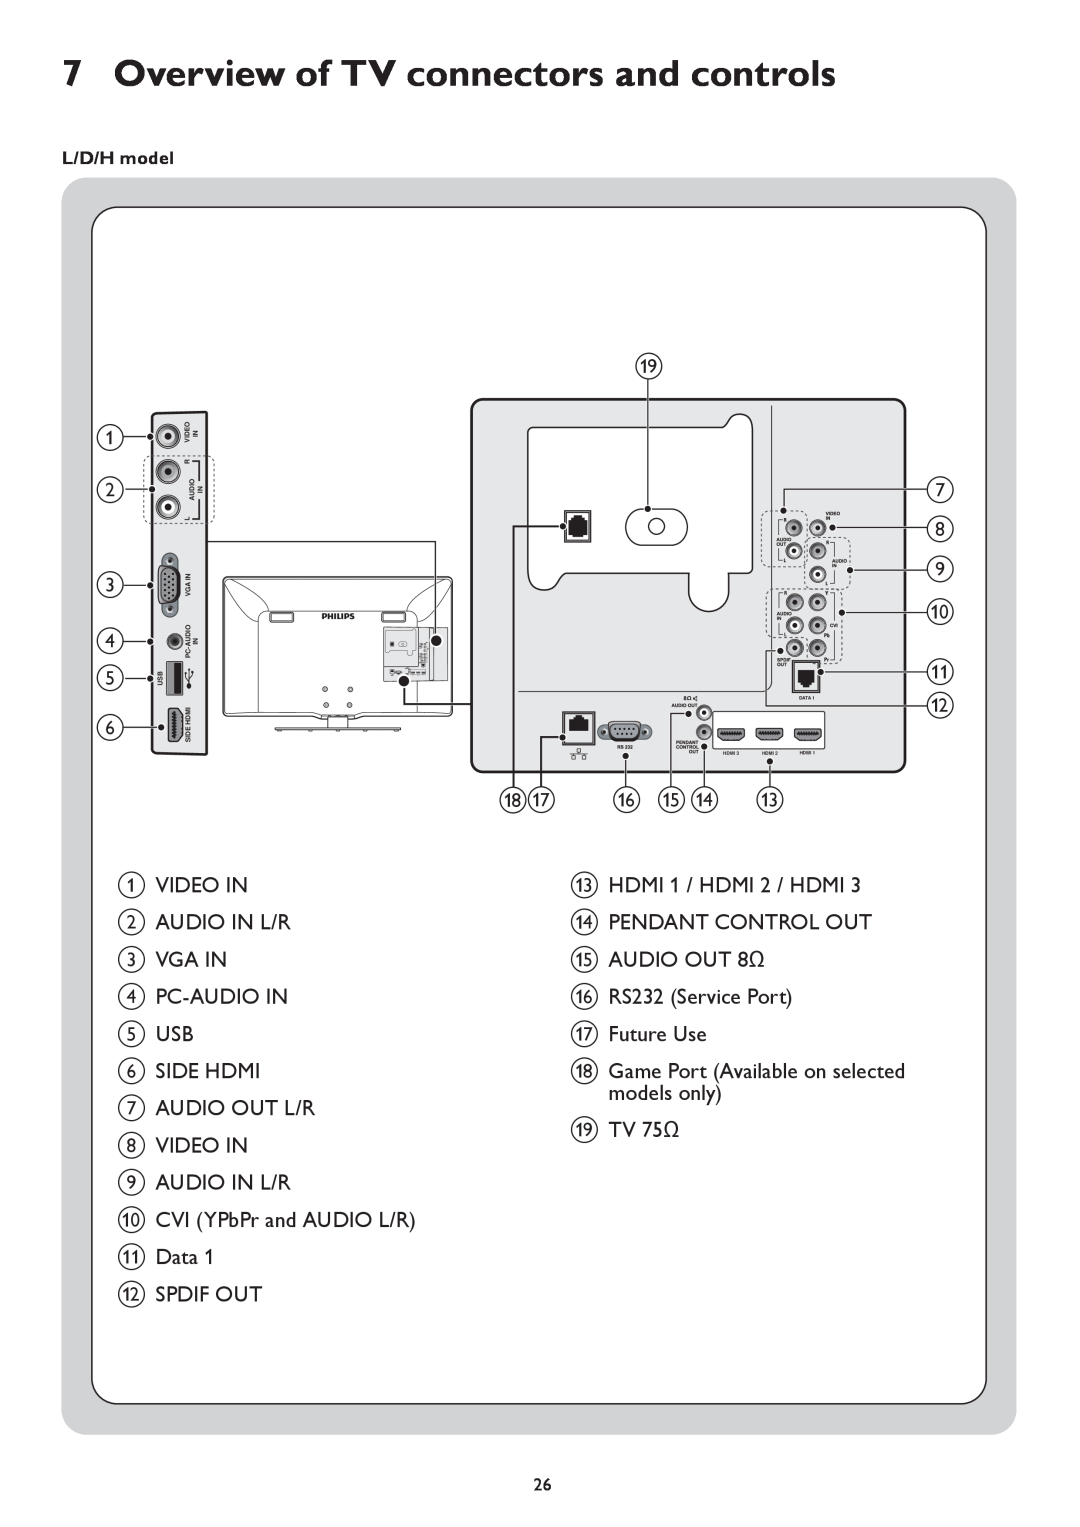 Philips 42HFL4482F, 42HFL5682H, 42HFL5682D, 37HFL5682D Overview of TV connectors and controls, rq p o n m, g h j k l 